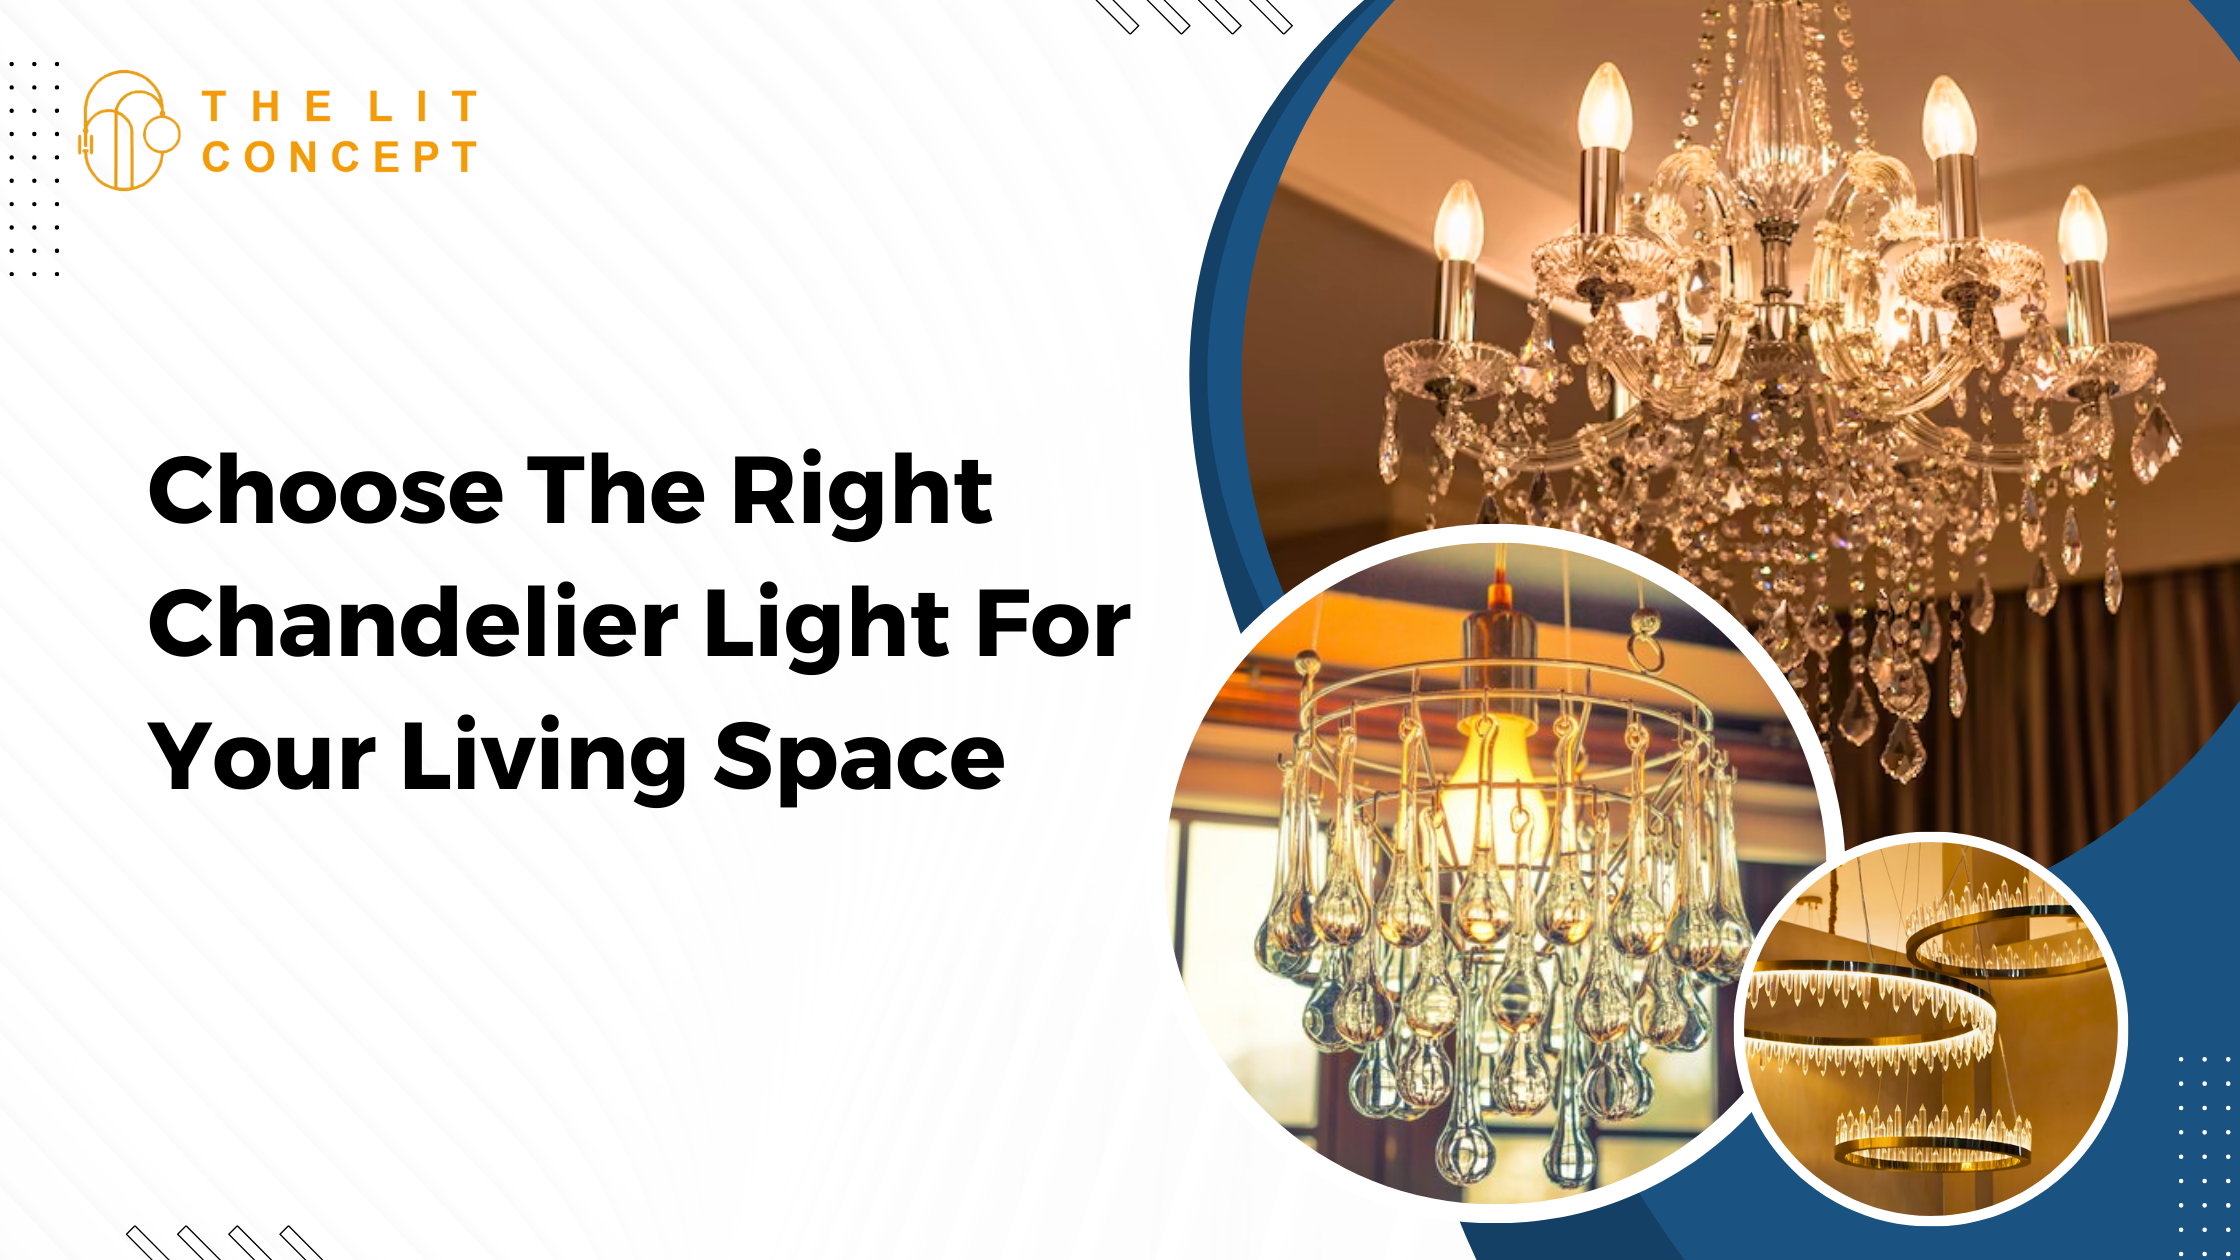 How to Choose The Right Chandelier Light For Your Living Space?